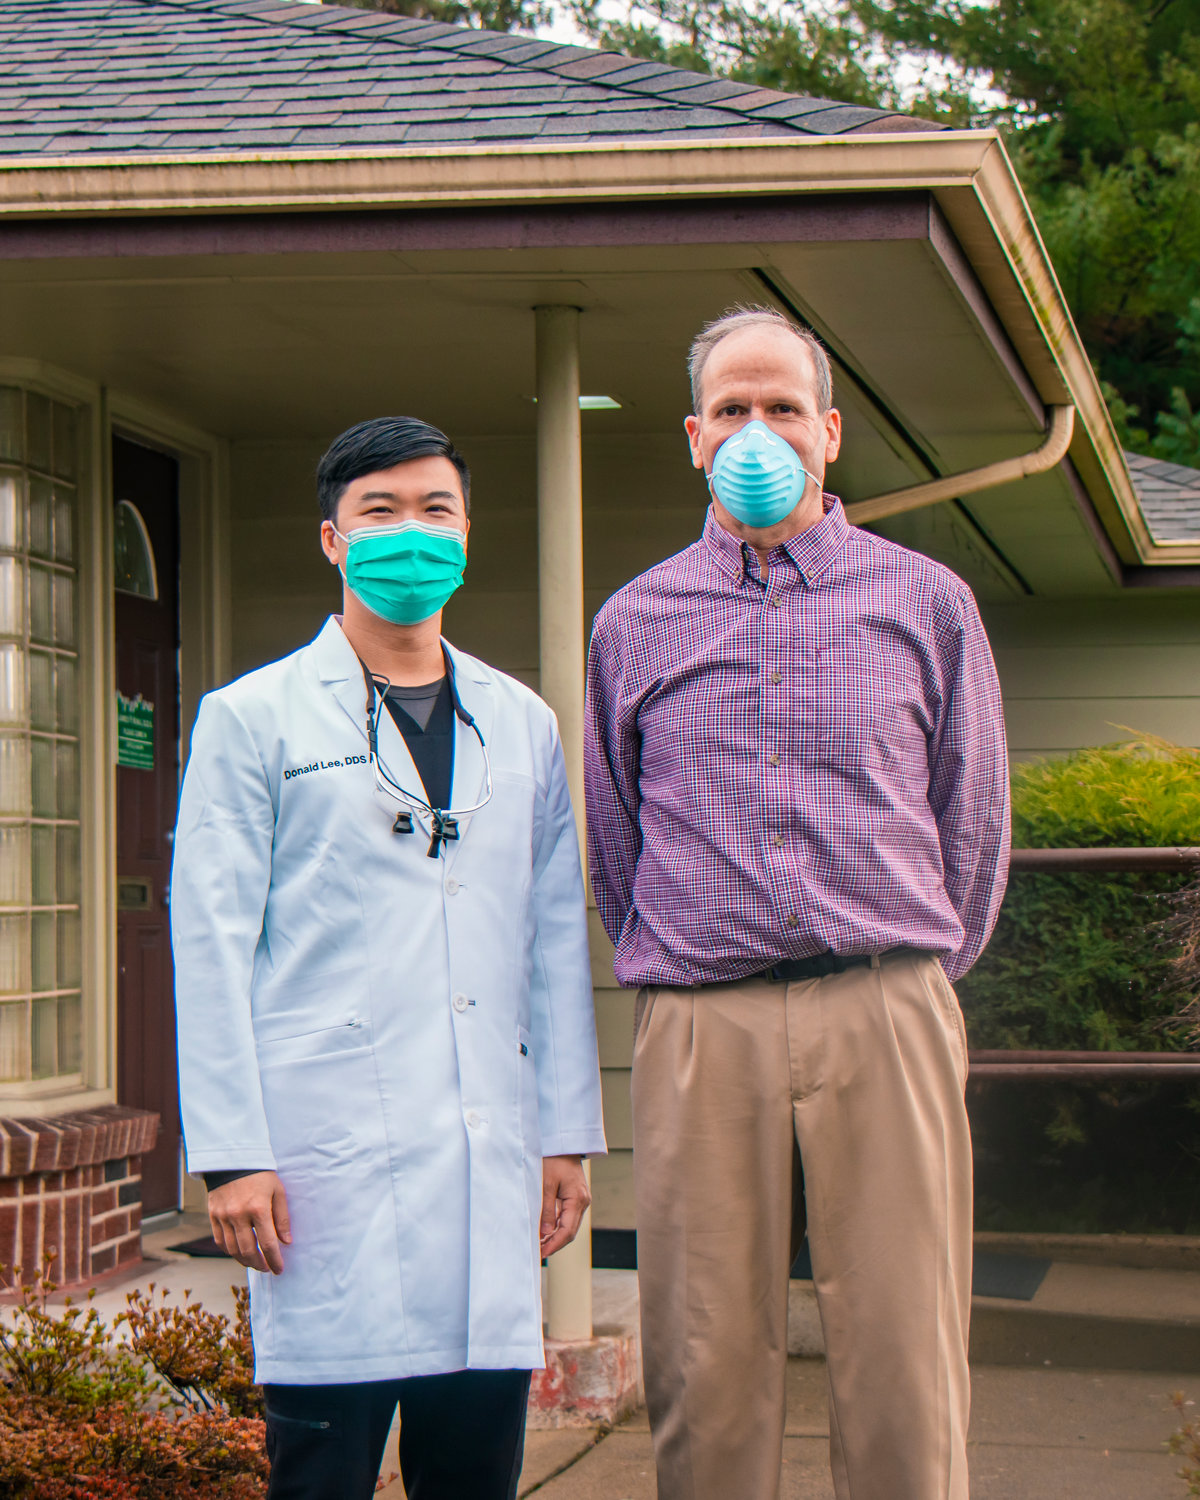 Donald Lee, DDS, left, and James King, DDS, pose for a photo outside the dentistry office located at 228 Harrison Ave. in Centralia.